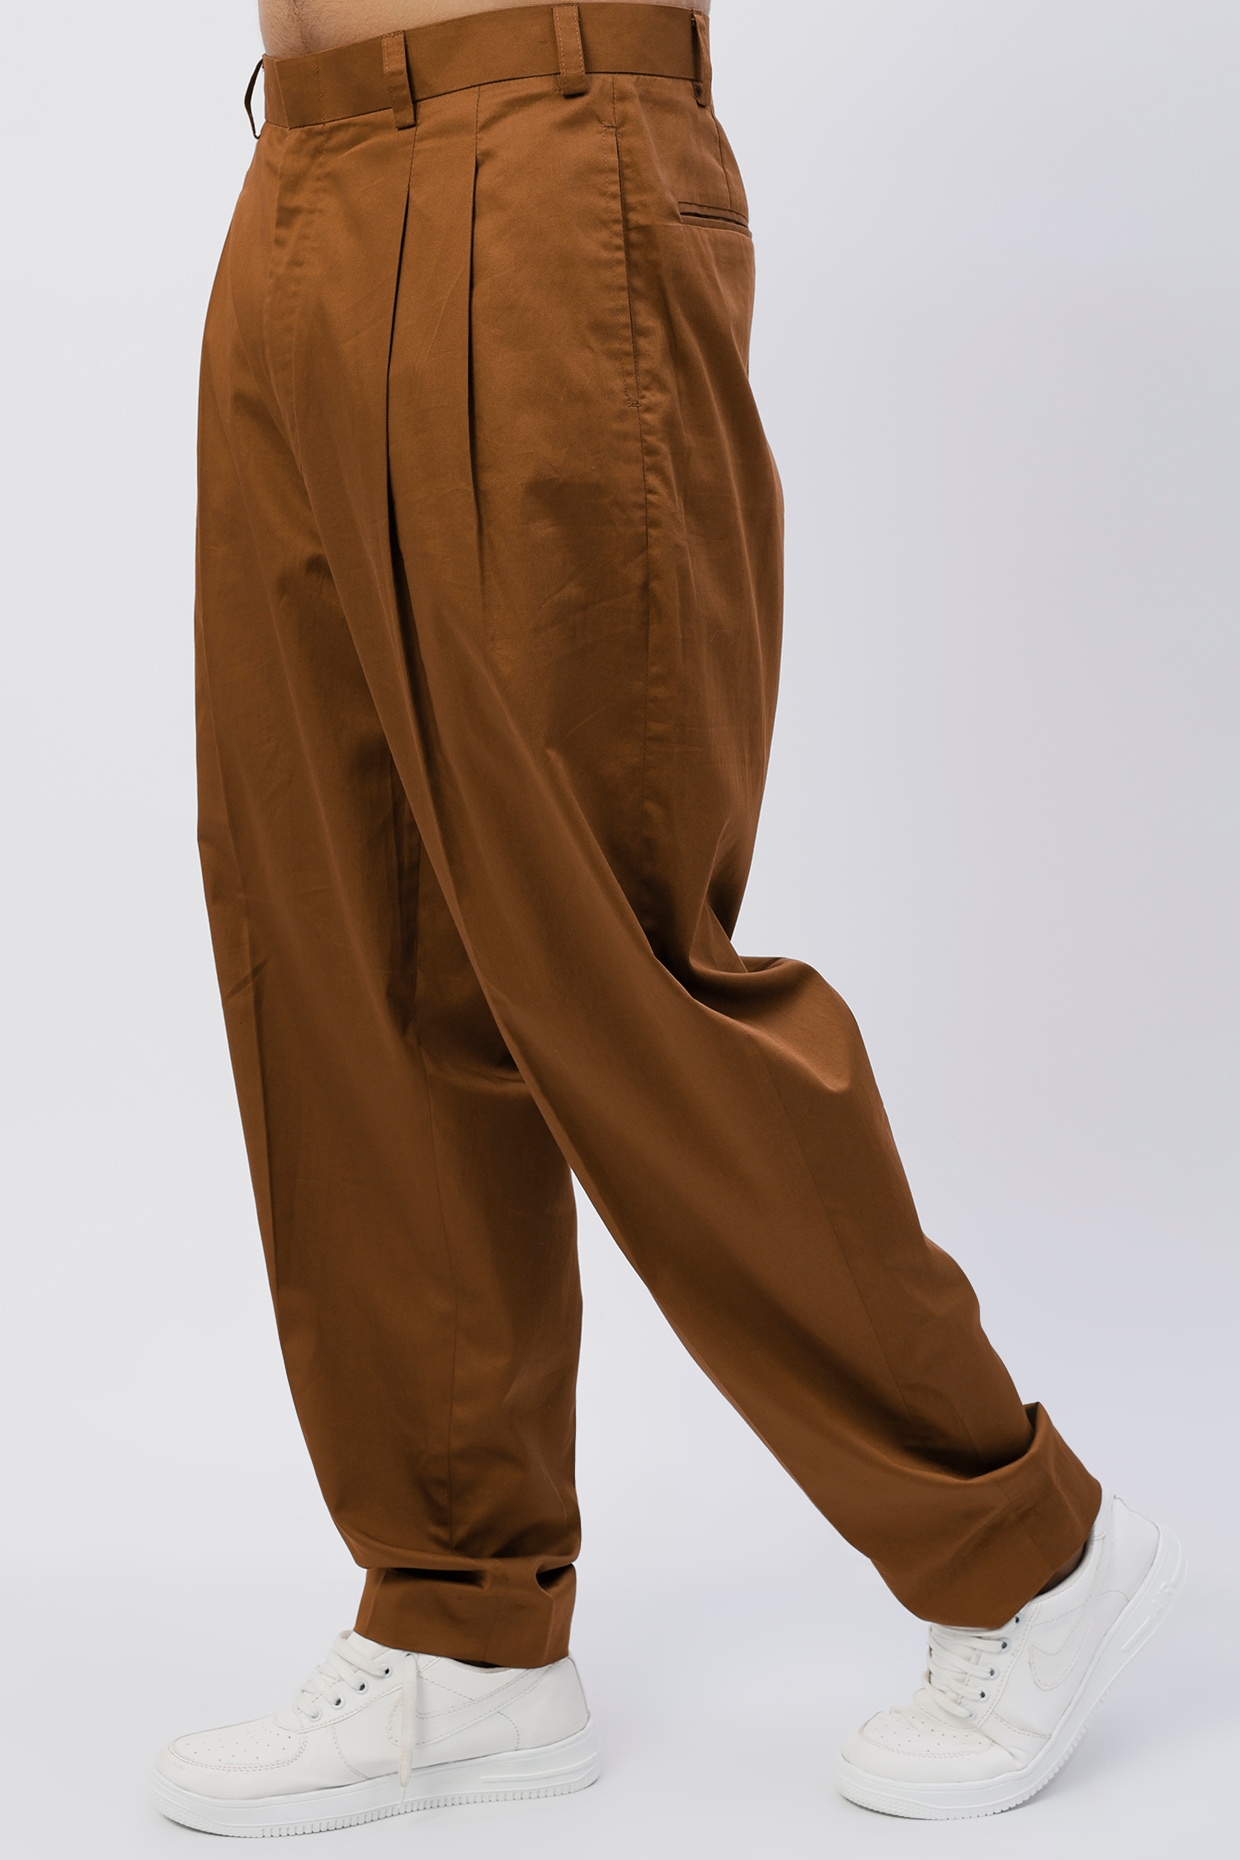 Co Ord Double Pleated Cargo Pants Sand  The Room Antwerp